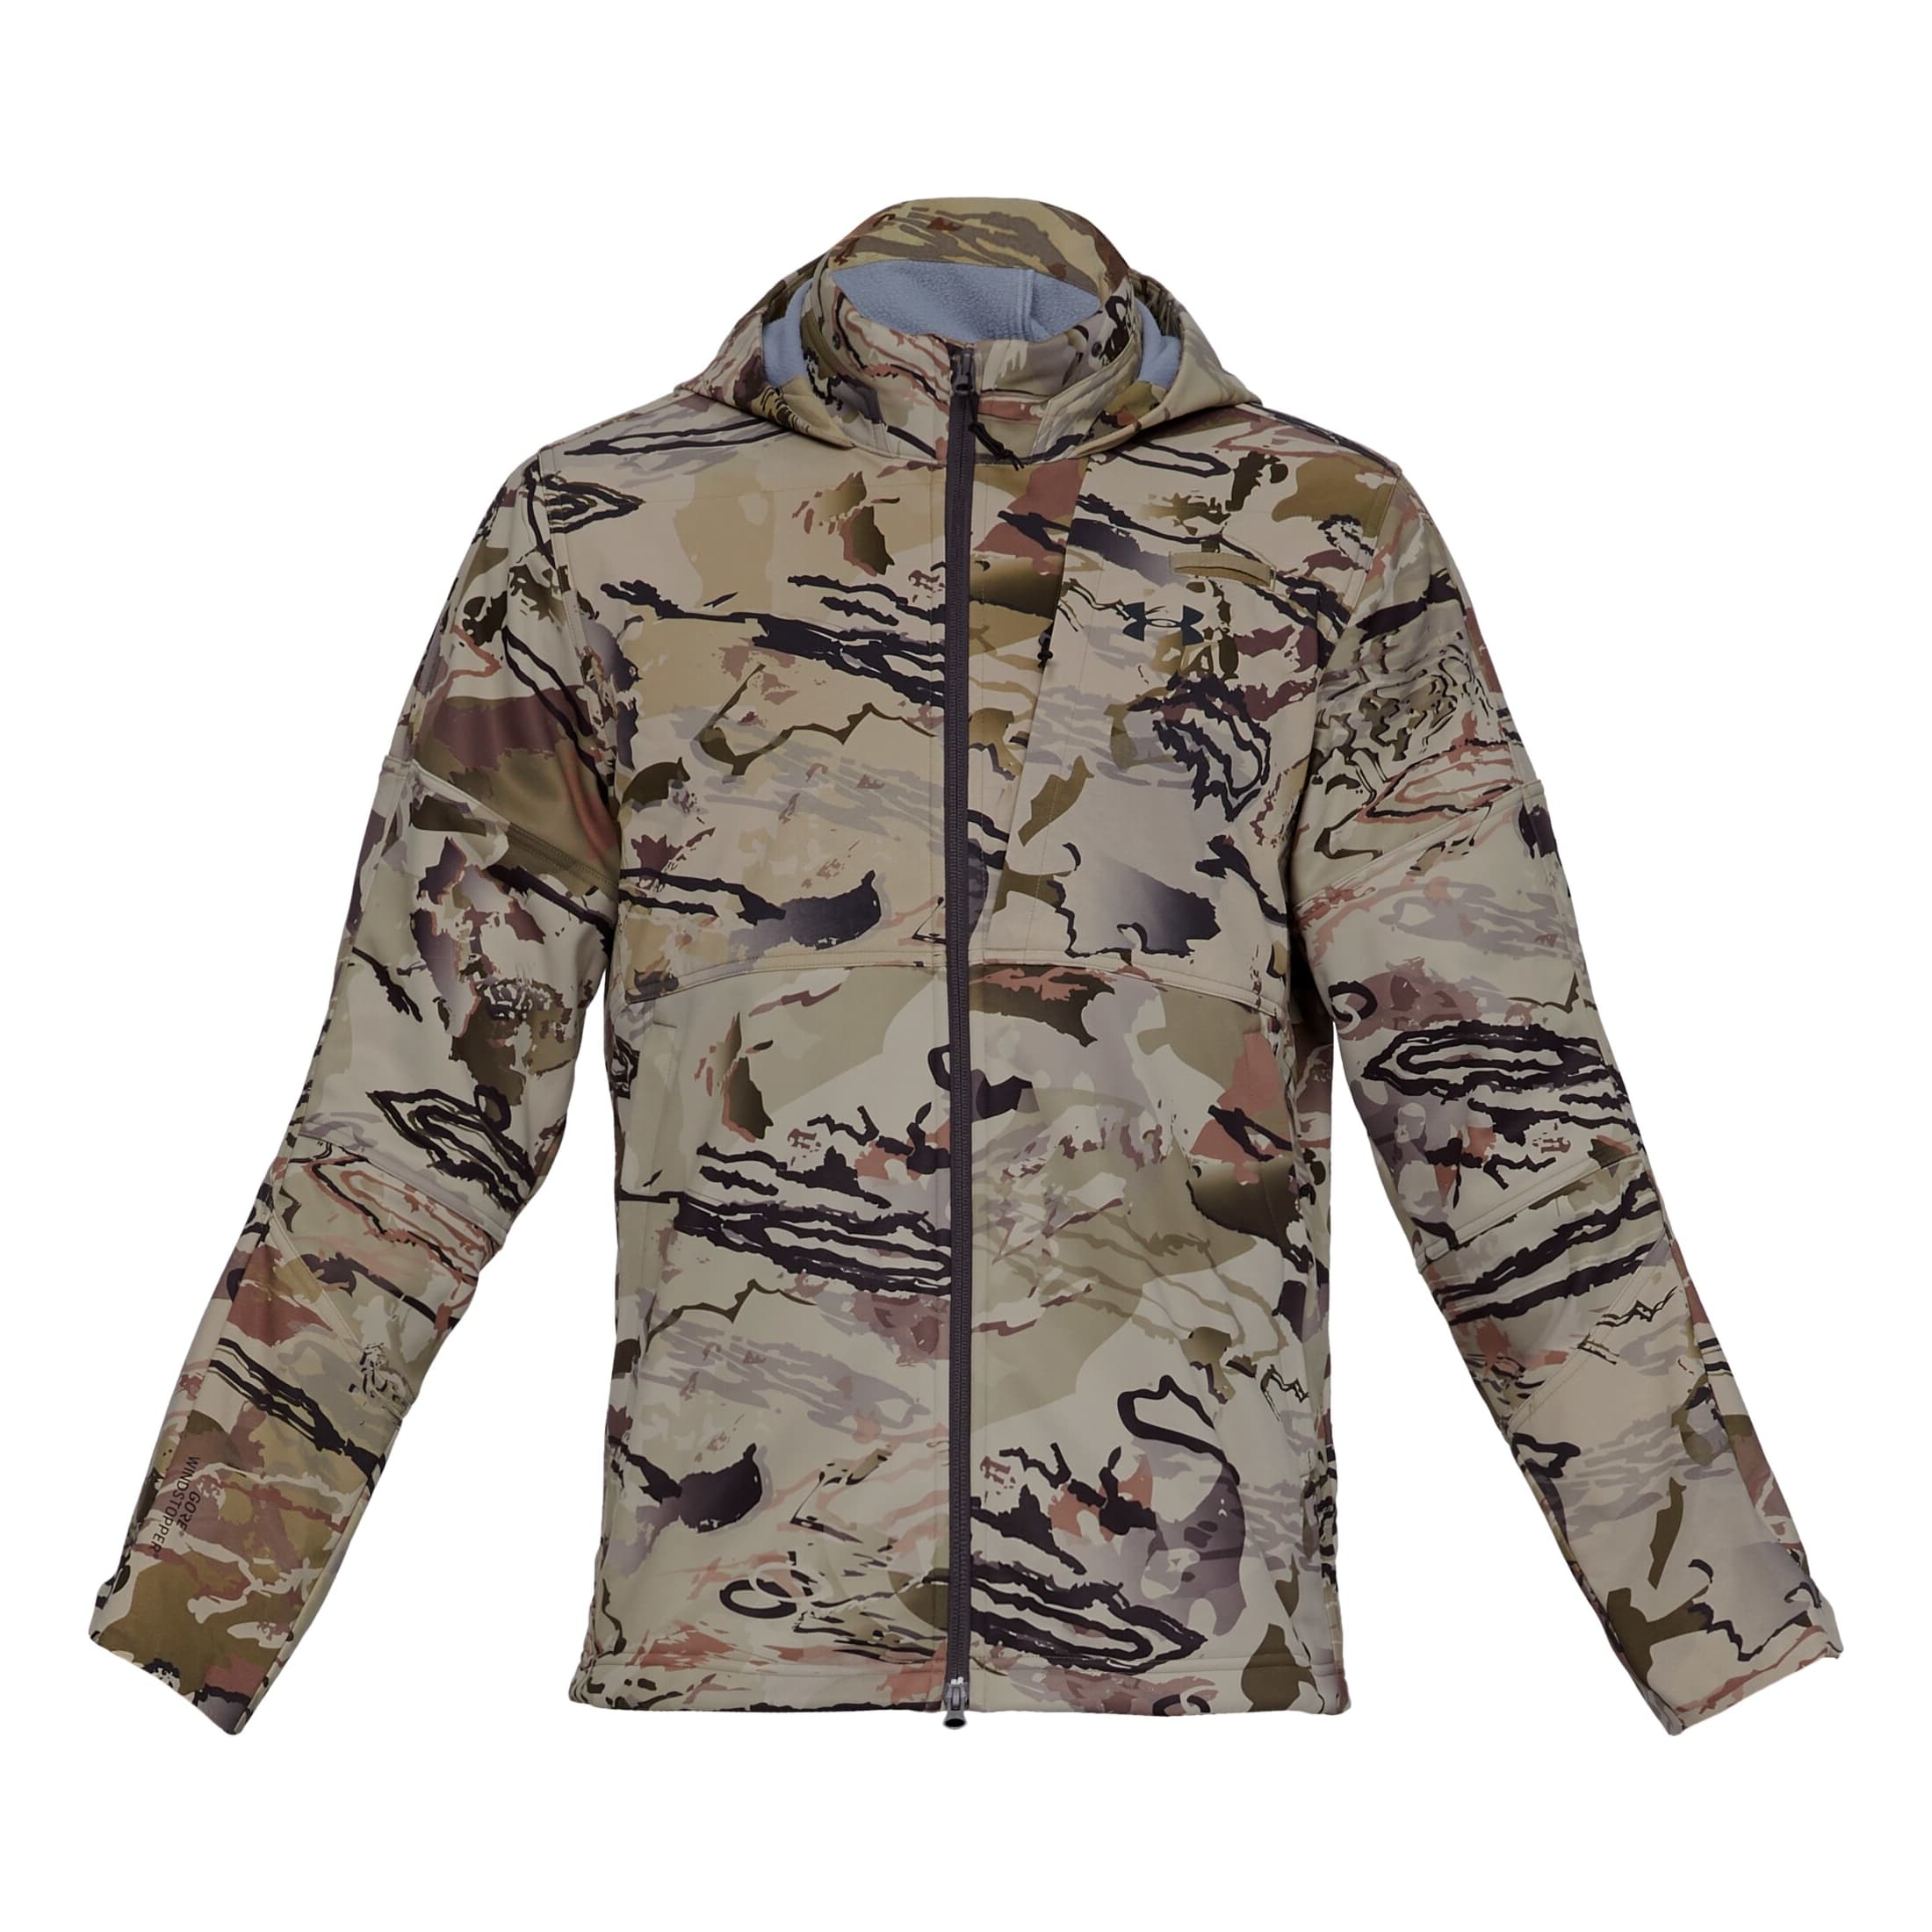  Natural Gear Windproof Full-Zip Fleece Jacket for Men and  Women, Natural Camouflage Pattern, Women's and Men's Hunting Jacket (Small)  : Clothing, Shoes & Jewelry